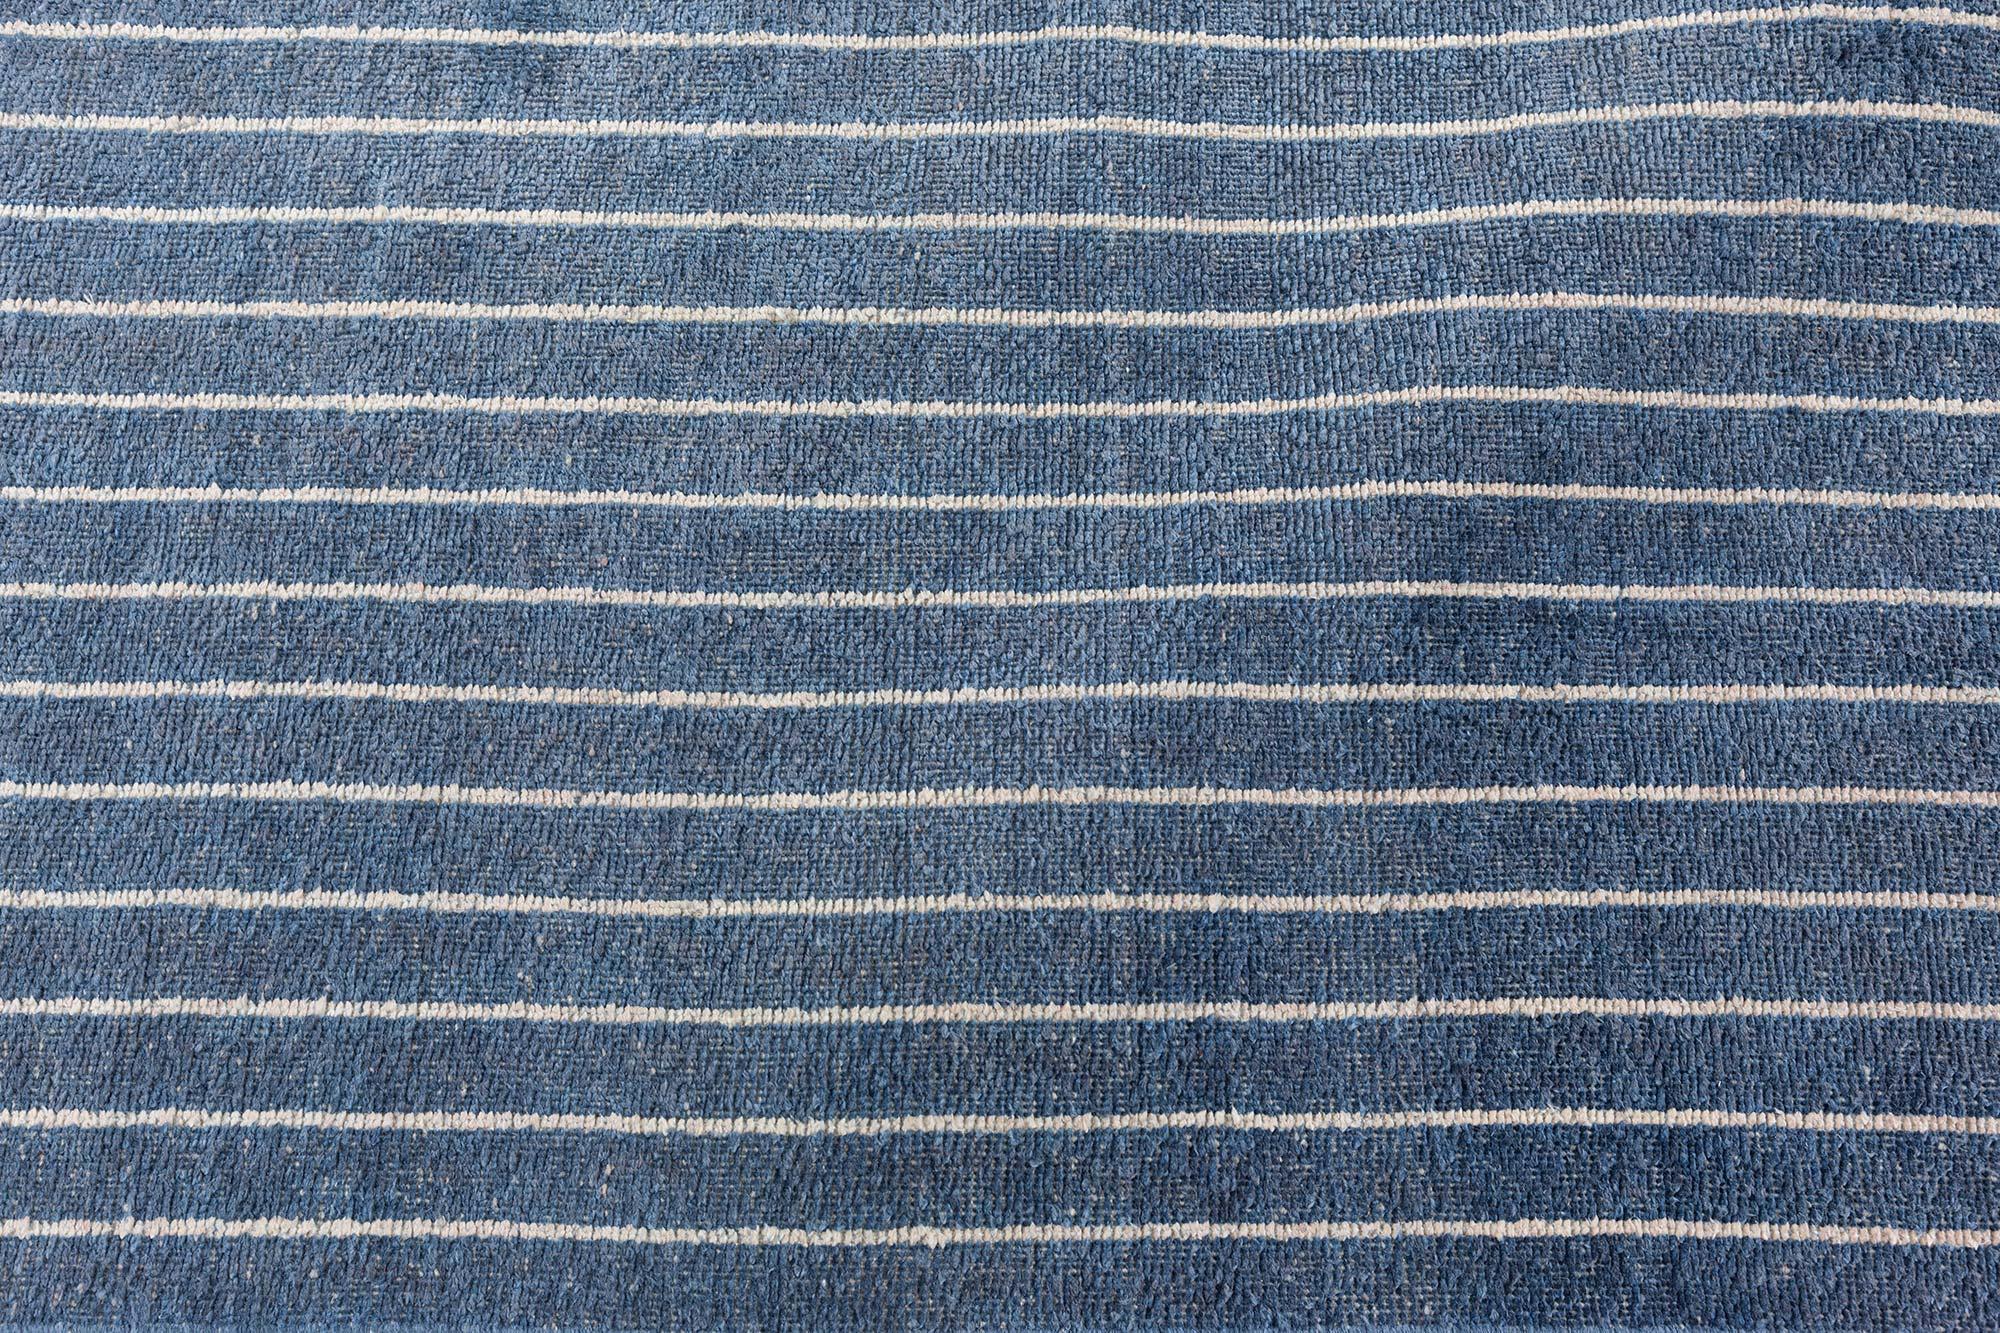 Contemporary Striped Blue and White Hand Knotted Runner by Doris Leslie Blau
Size: 4'5